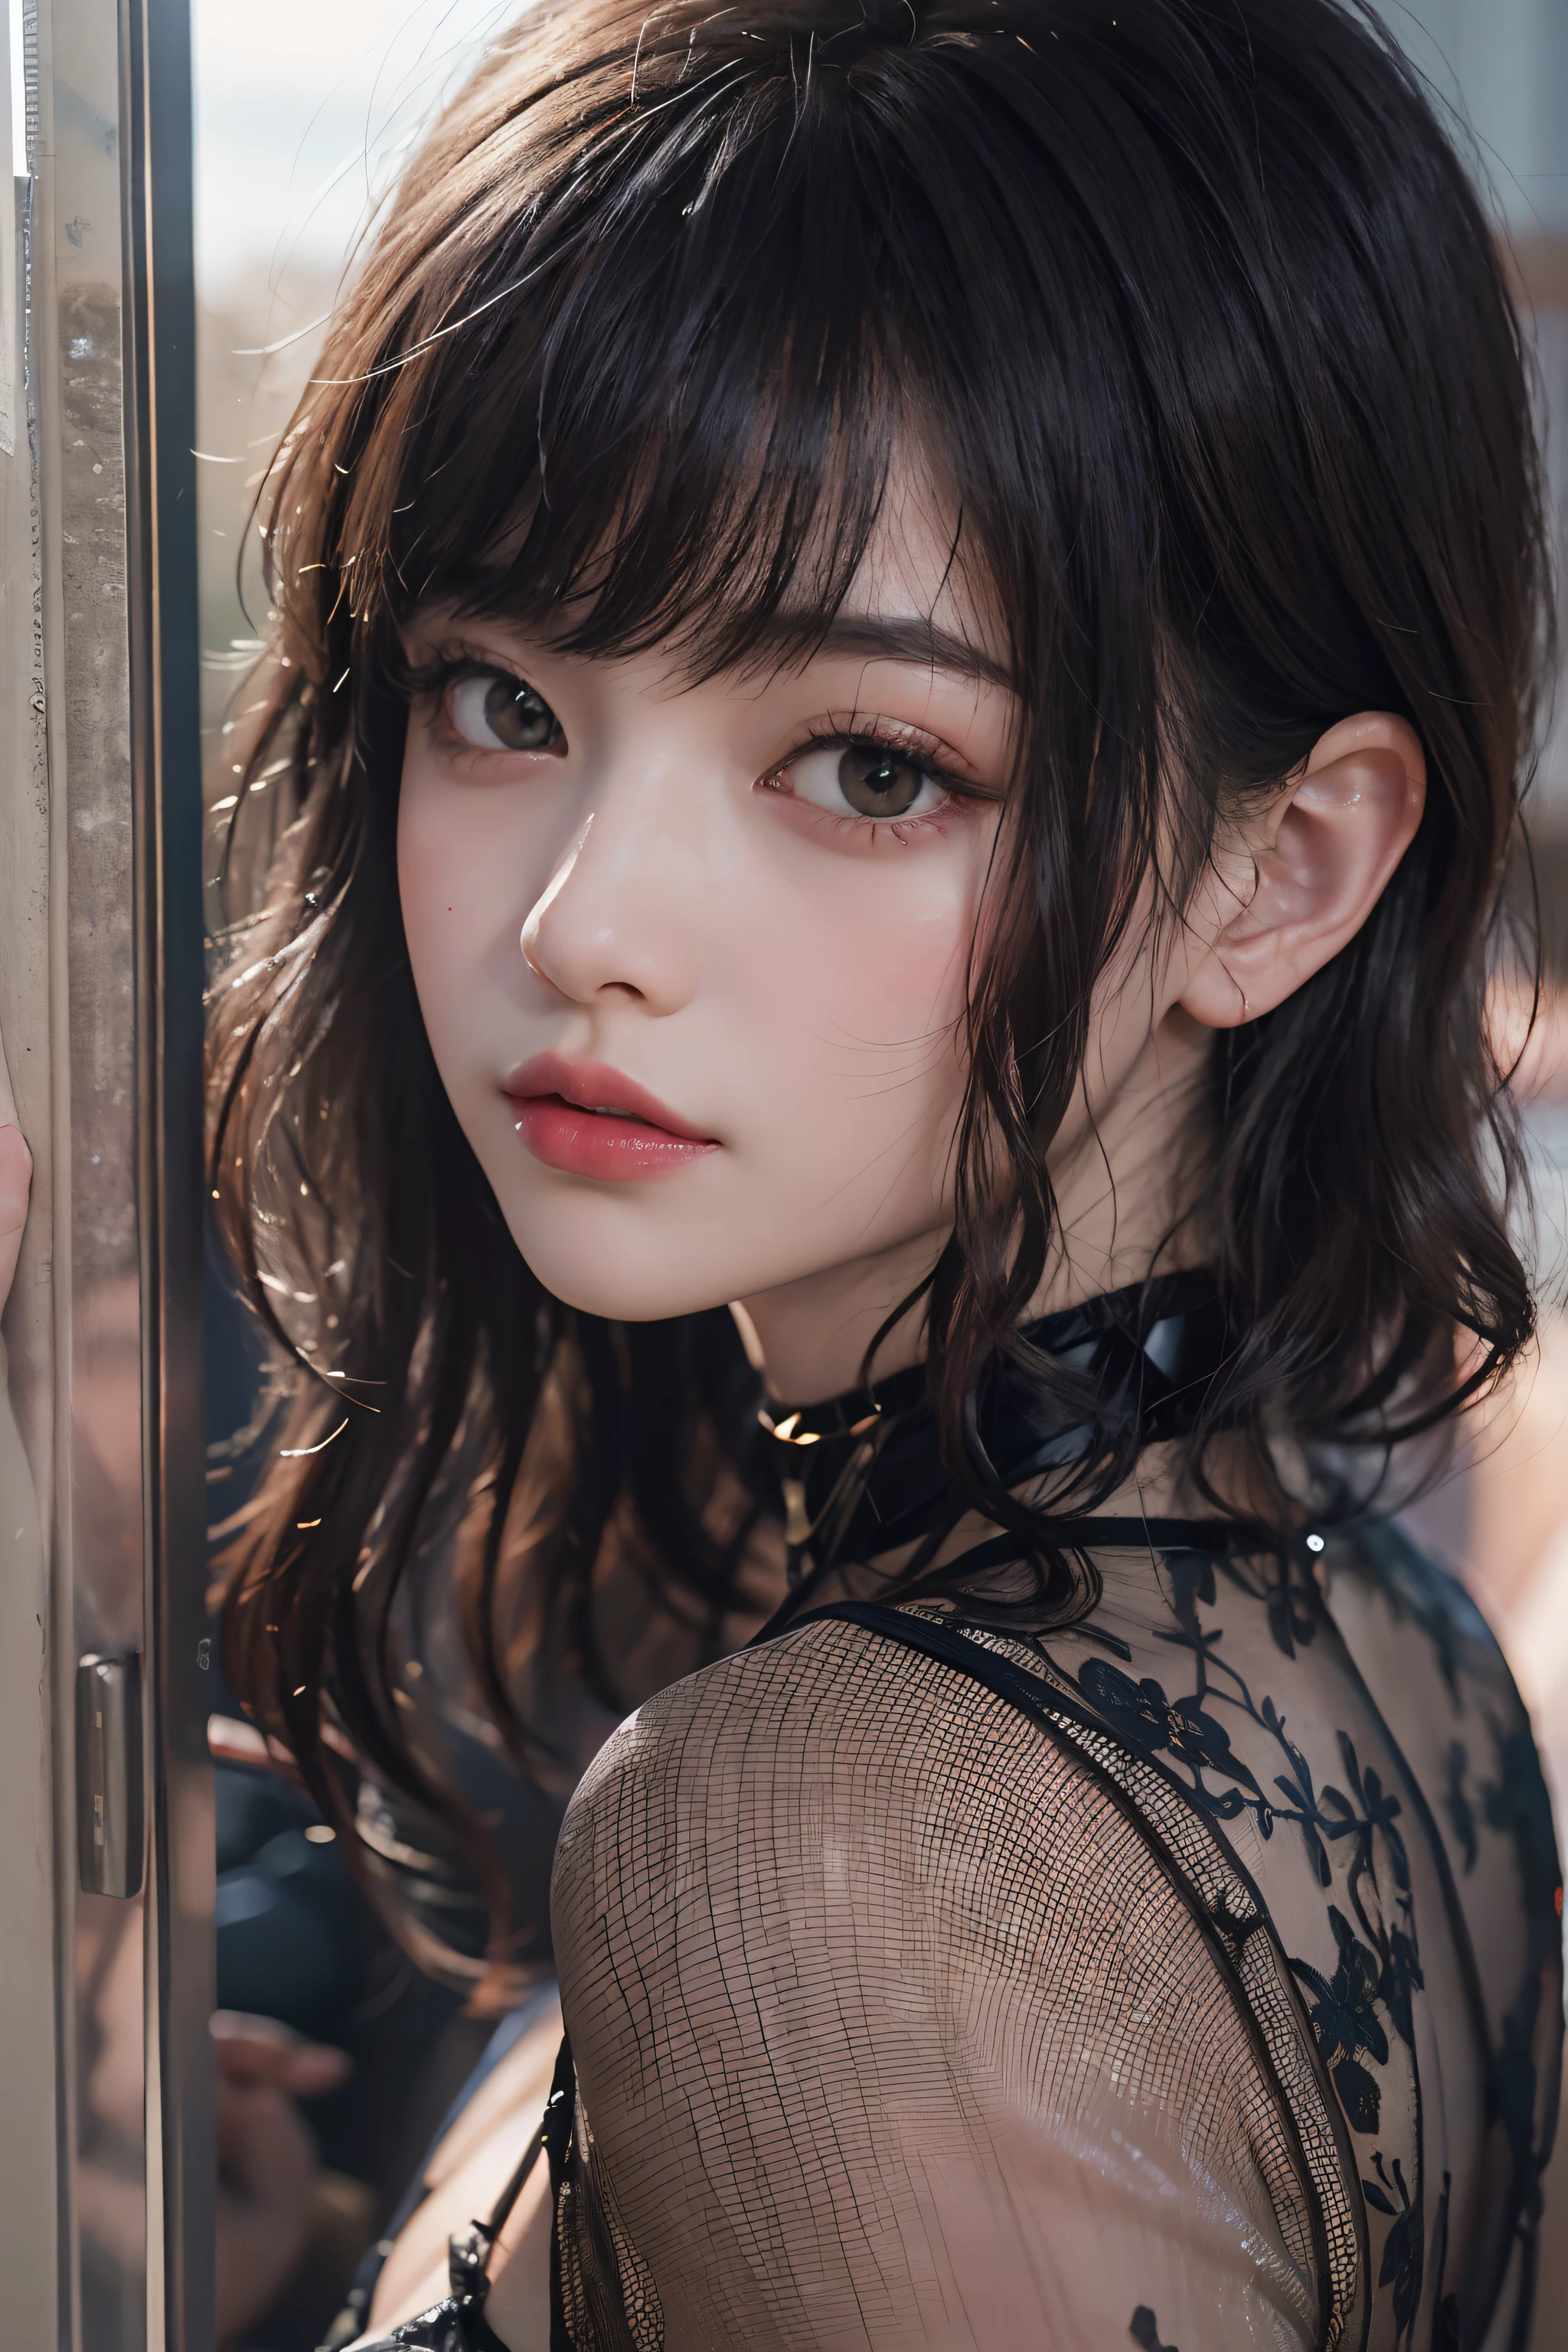 realisitic、8K UHD、hight resolution、(Photoreal Stick:1.2)、(1girl in)、((profile))、(profile)、(black hair shorthair)、((Knee shot))、(High quality shadows)、Detail Beautiful delicate face、Detail Beautiful delicate eyes、in her 20s、(A dark-haired)Pretty Kpop Girl、(Korean Urzan Face)、(ulzzang -6500-v1.1:0.6)、pureerosface_v1、gloweyes、perfectbody、 Incredible dynamic range photography(UTIL_Art by Smoose-768:1.1), teak、Bright red lipstick、Glossy lips、Natural color reproduction、((strong lights))、((profile))、(a choker)、((Brown eyes))、((Beautiful Finger))、(Pattsun bangs)、(bangss)、 Shiny hair、Description beautiful delicate hair、(Lustrous skin)、(Black see-through dress)、(Black shortcuts)、(early evening)、(Through the window)、(Inorganic concrete chamber)、(Background blur)、